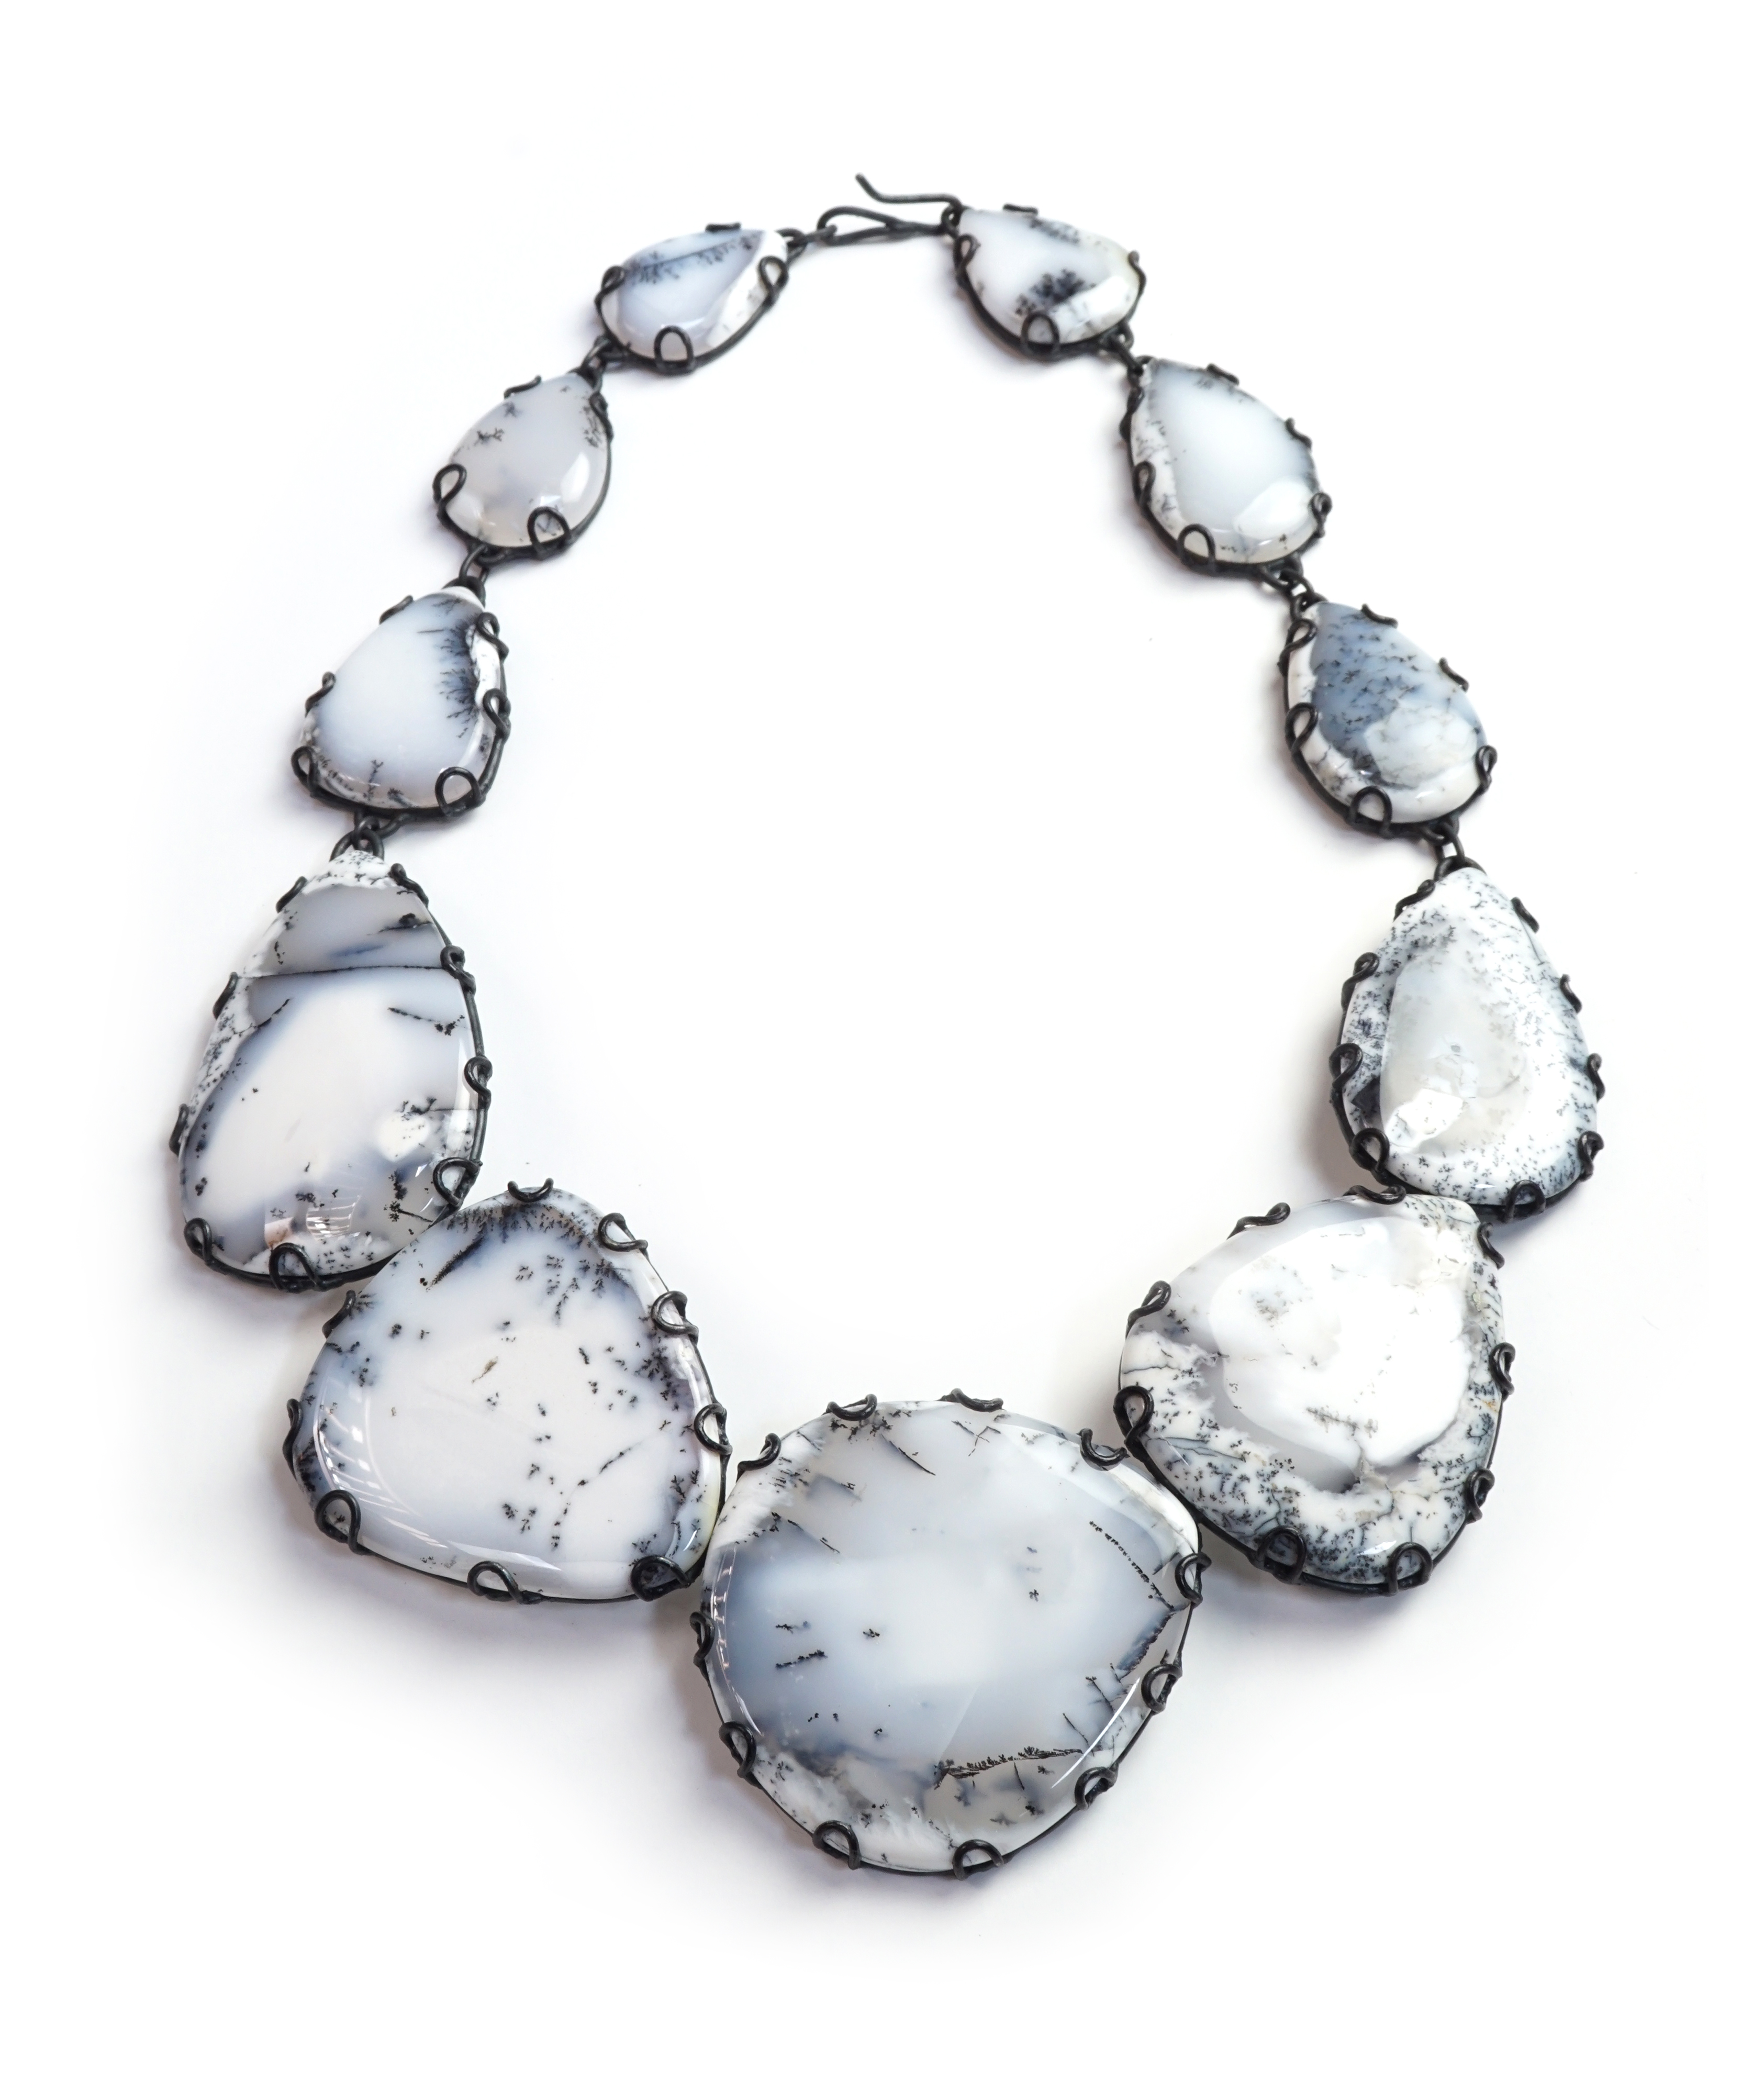 Contra Composition Necklace No. 10 // one of a kind dendritic opal statement necklace handcrafted by designer and metalsmith Megan Auman